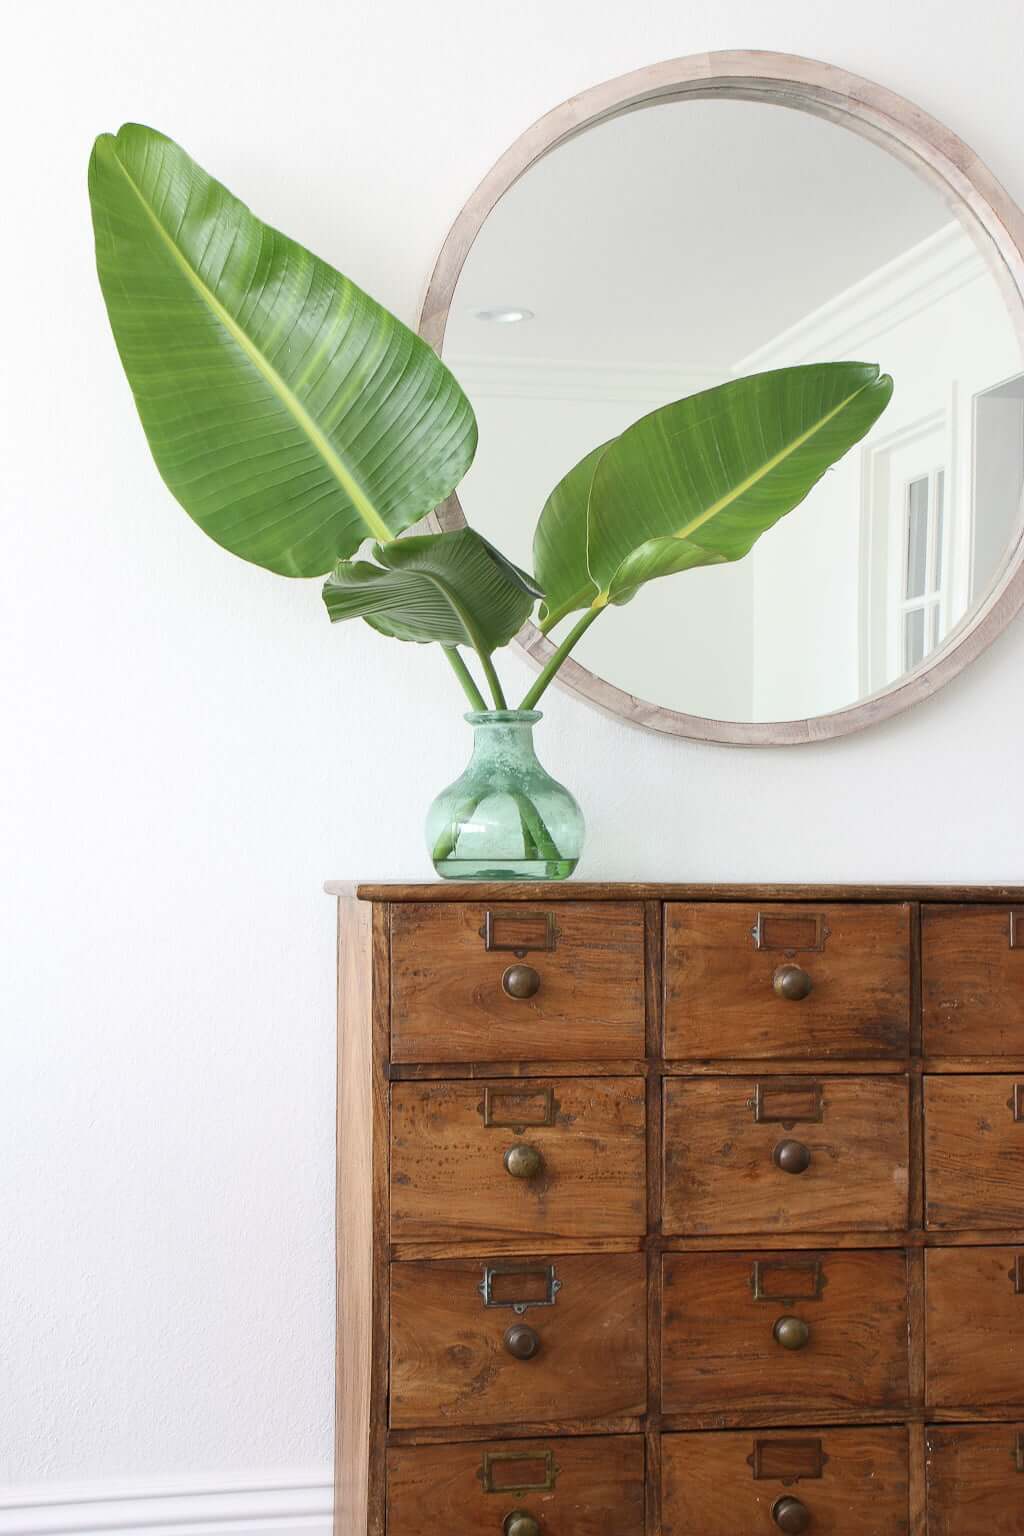 bird of paradise leaves on top of set of drawers, with mirror on wall